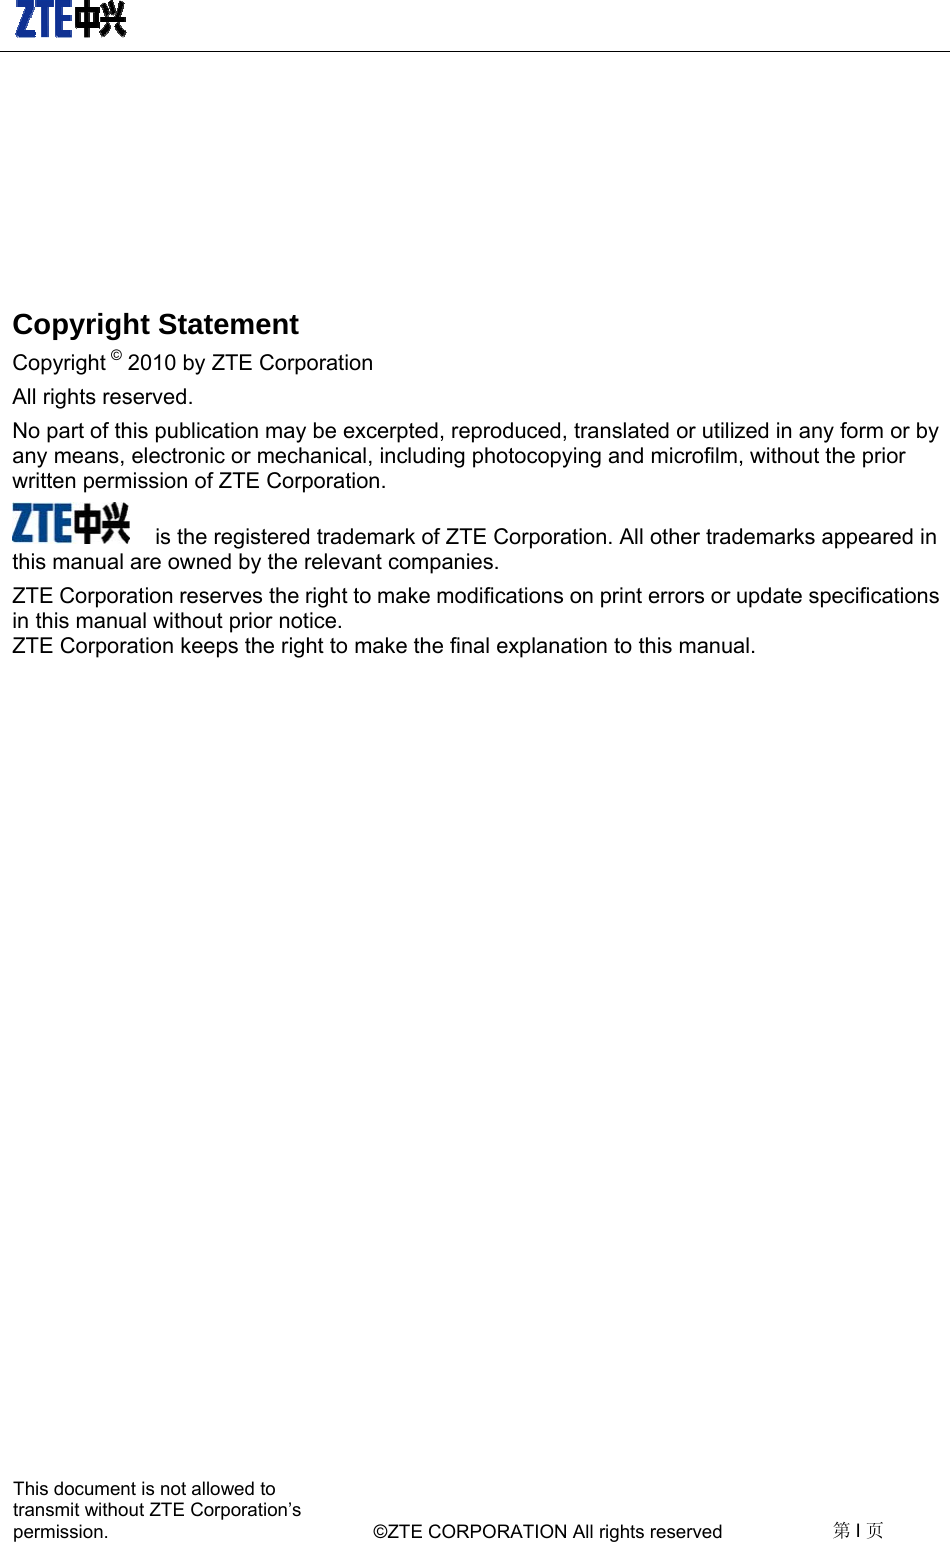   This document is not allowed to transmit without ZTE Corporation’s permission.    ©ZTE CORPORATION All rights reserved  第I页   Copyright Statement Copyright © 2010 by ZTE Corporation All rights reserved. No part of this publication may be excerpted, reproduced, translated or utilized in any form or by any means, electronic or mechanical, including photocopying and microfilm, without the prior written permission of ZTE Corporation.  is the registered trademark of ZTE Corporation. All other trademarks appeared in this manual are owned by the relevant companies. ZTE Corporation reserves the right to make modifications on print errors or update specifications in this manual without prior notice.   ZTE Corporation keeps the right to make the final explanation to this manual.  